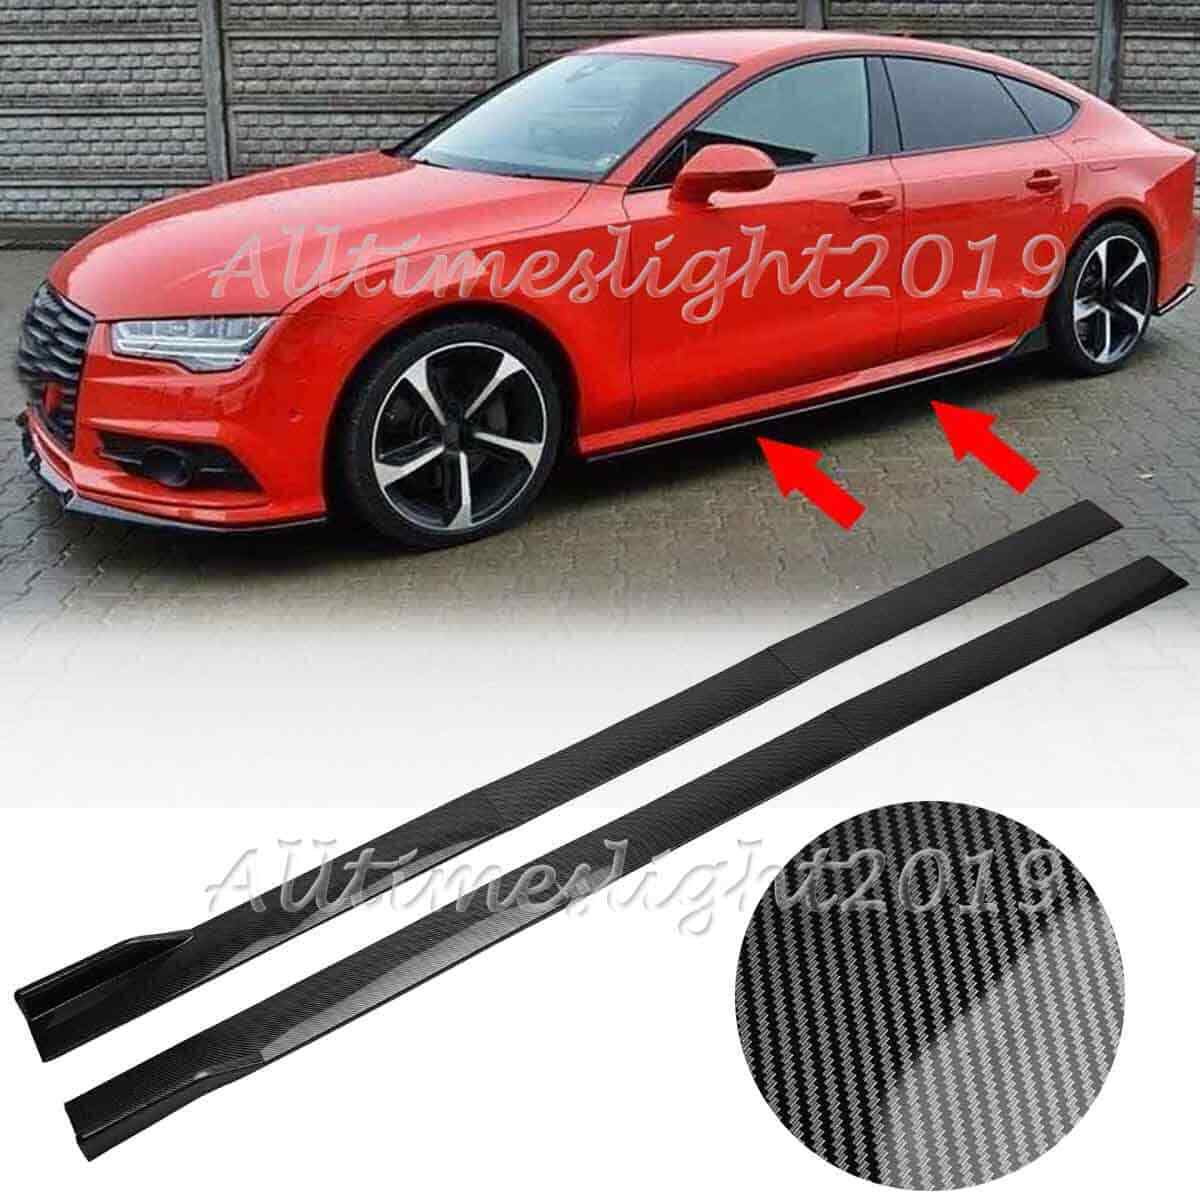 For Audi A3 S3 A4 S4 A5 S5 RS5 A7 A8 86.6'' Carbon Fiber Side Skirts Extension